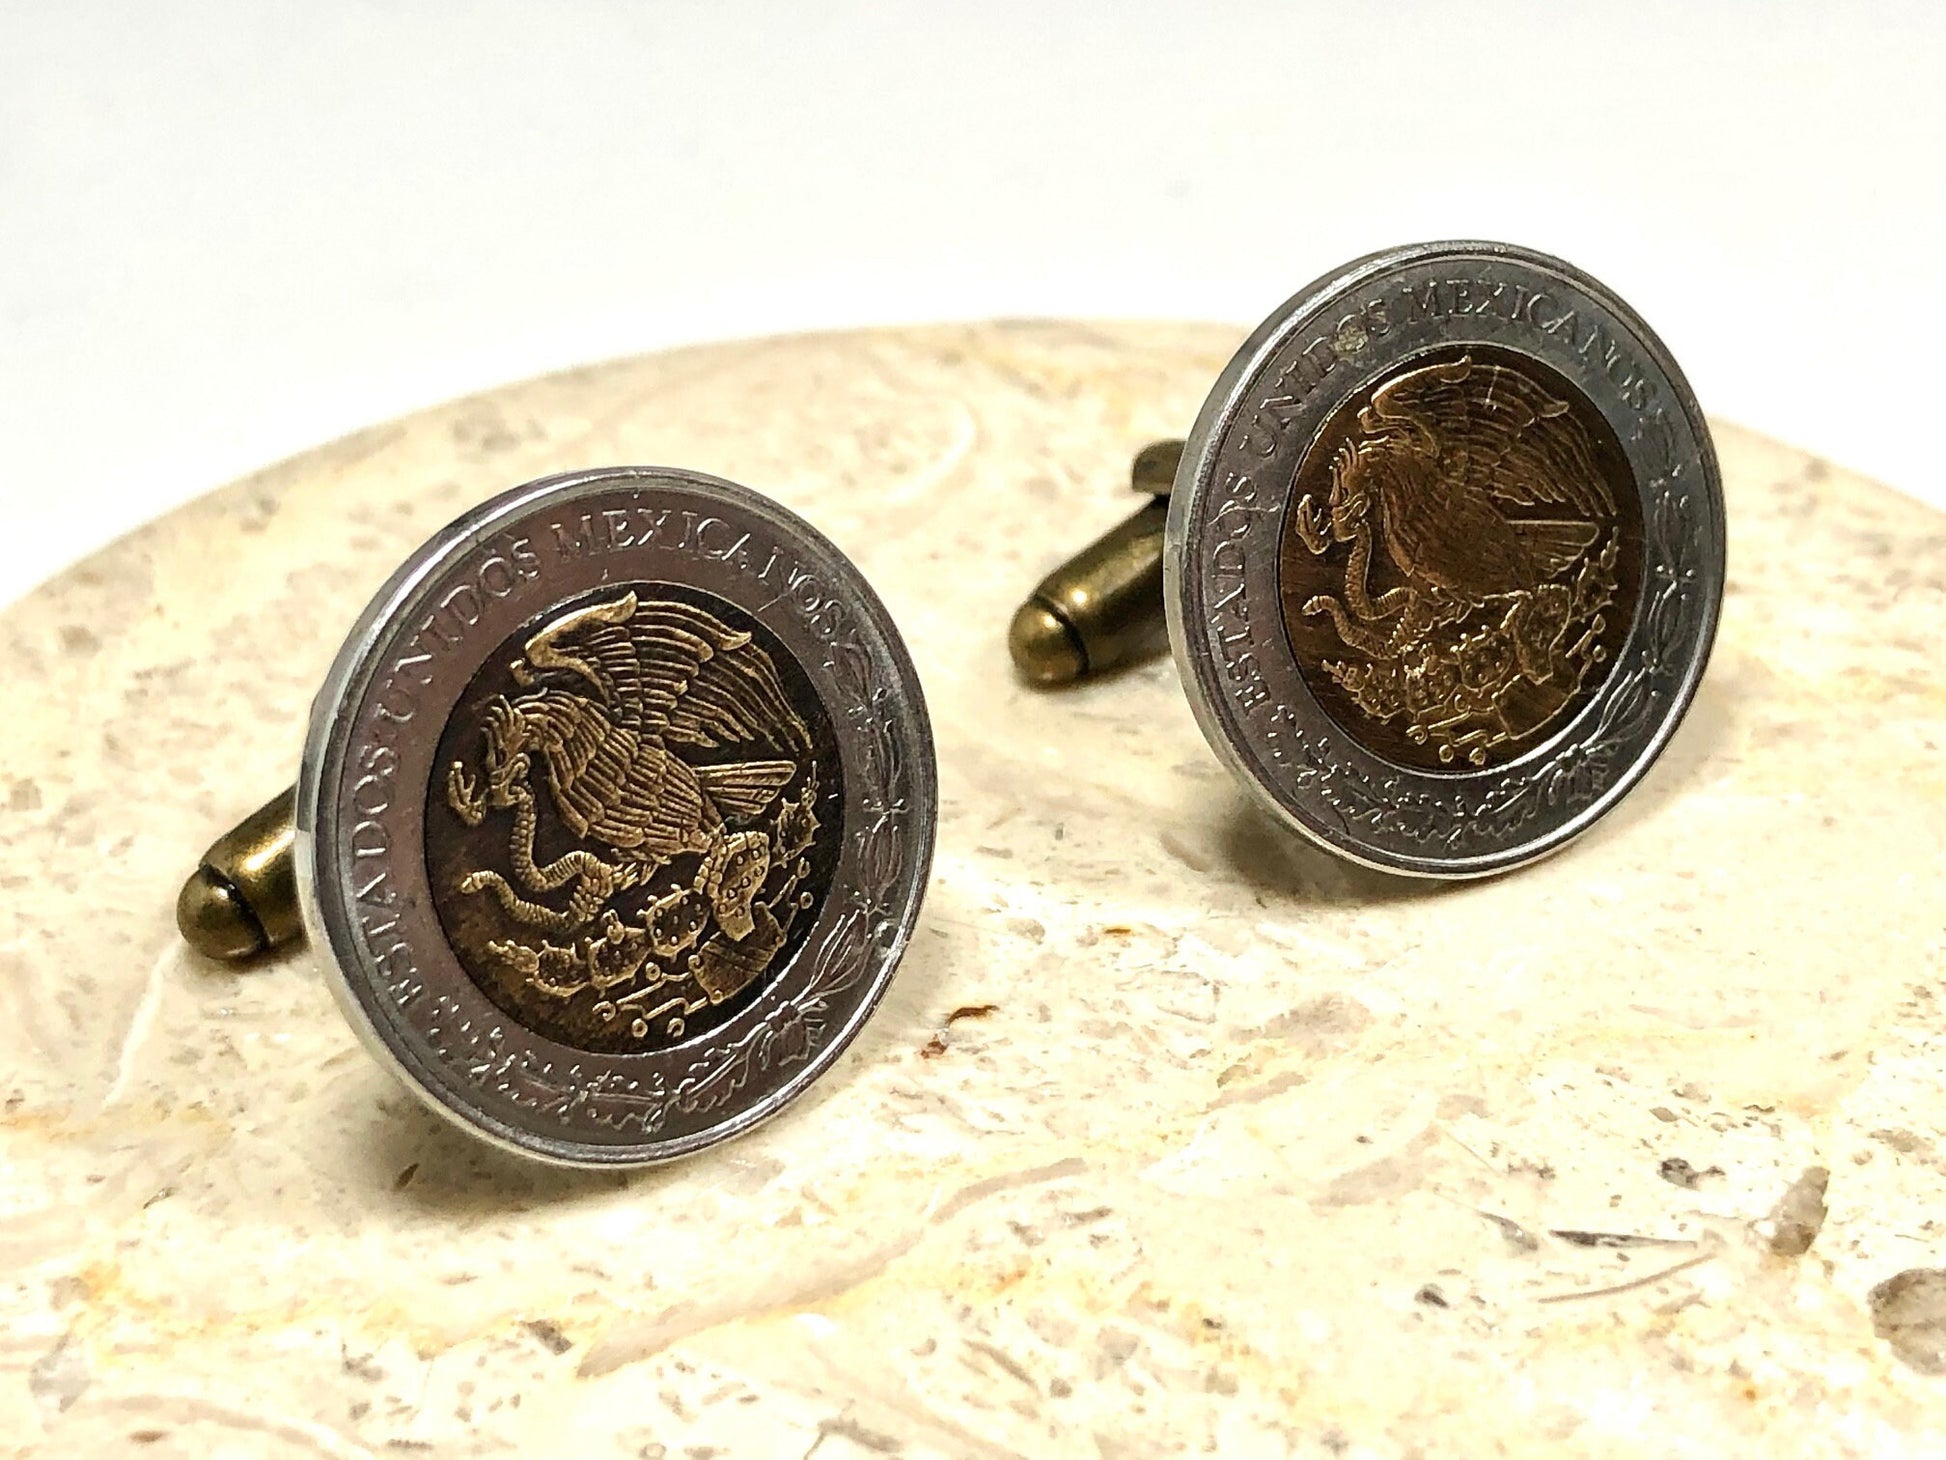 Mexico Coin Cuff Links Mexican One Peso Personal Cufflinks Old Vintage Handmade Jewelry Gift Friend Charm For Him Her World Coin Collector